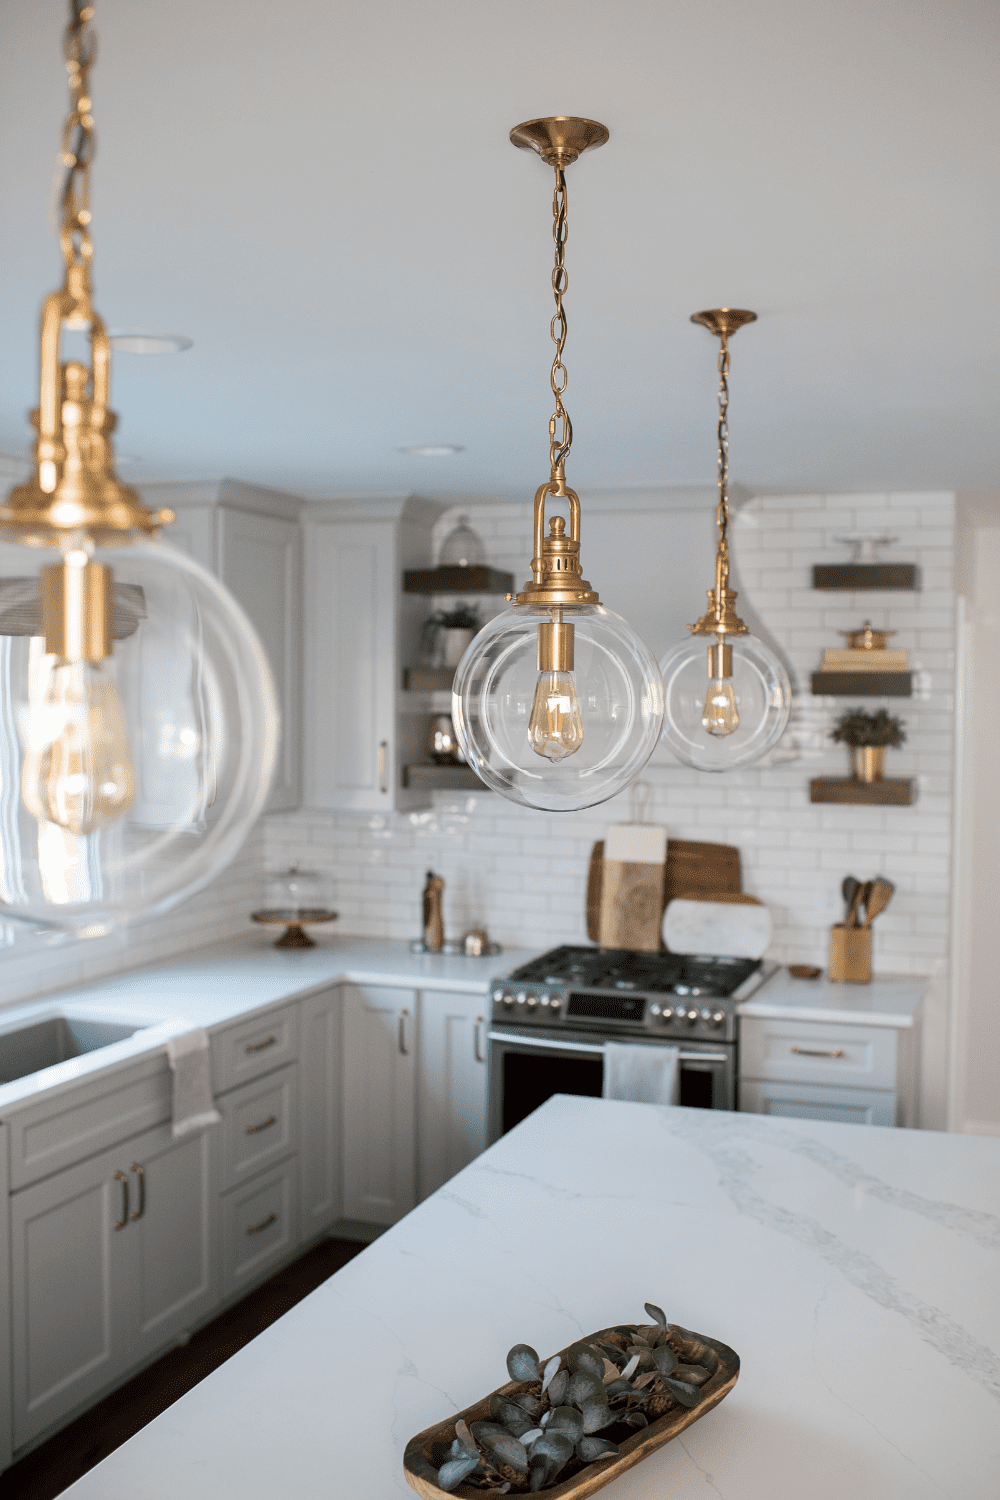 Nicholas Design Build | A neutral kitchen with a marble counter top and glass pendant lights.